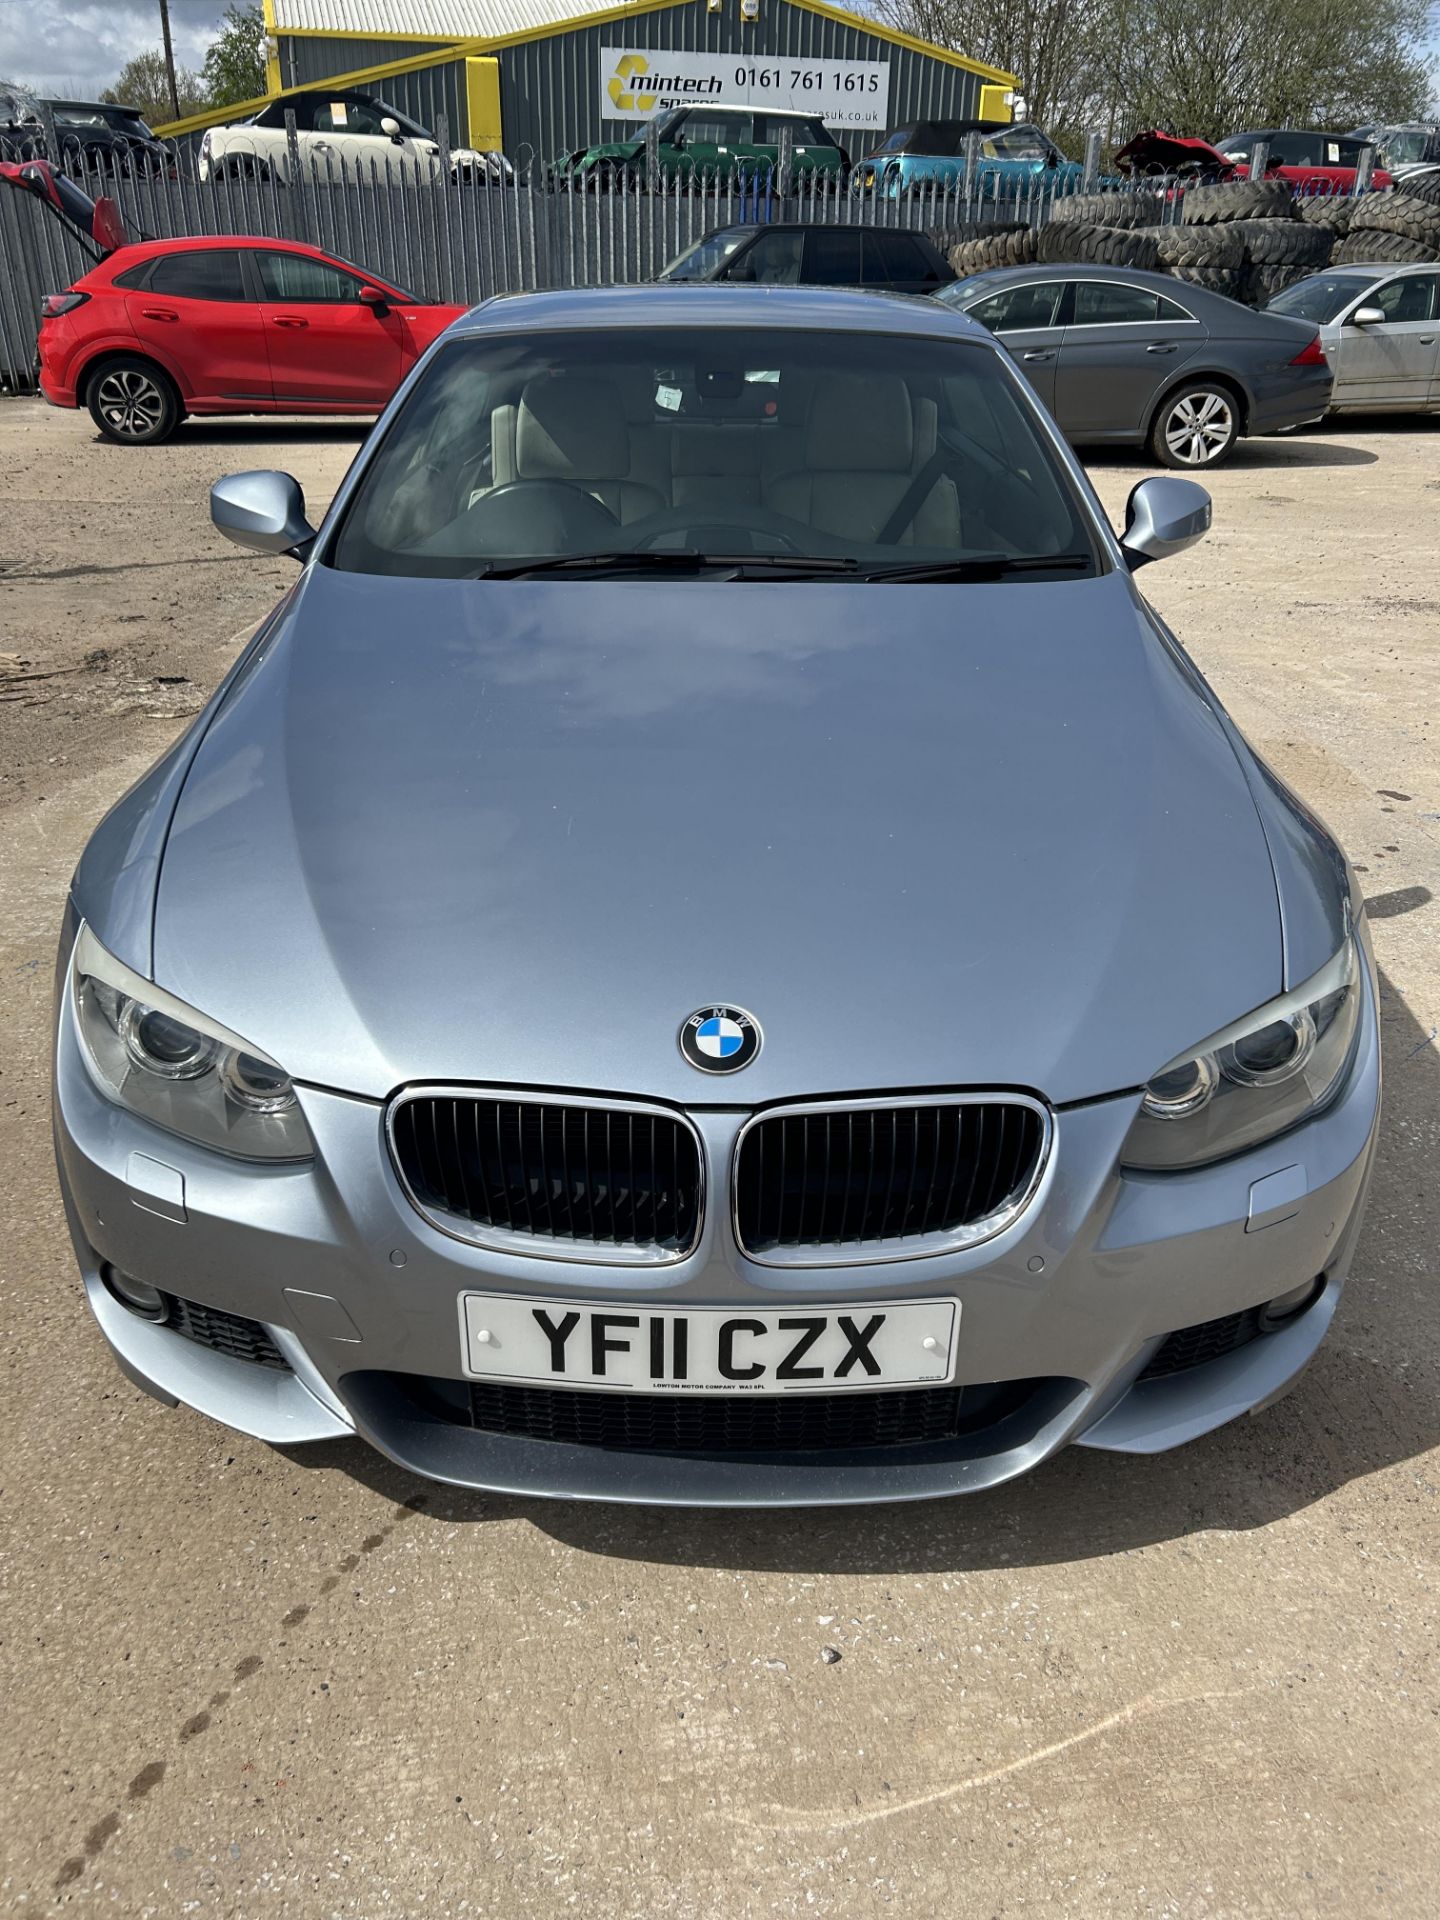 BMW 330I M Sport Auto Petrol Convertible | YF11 CZX | 61,658 Miles - Image 2 of 15